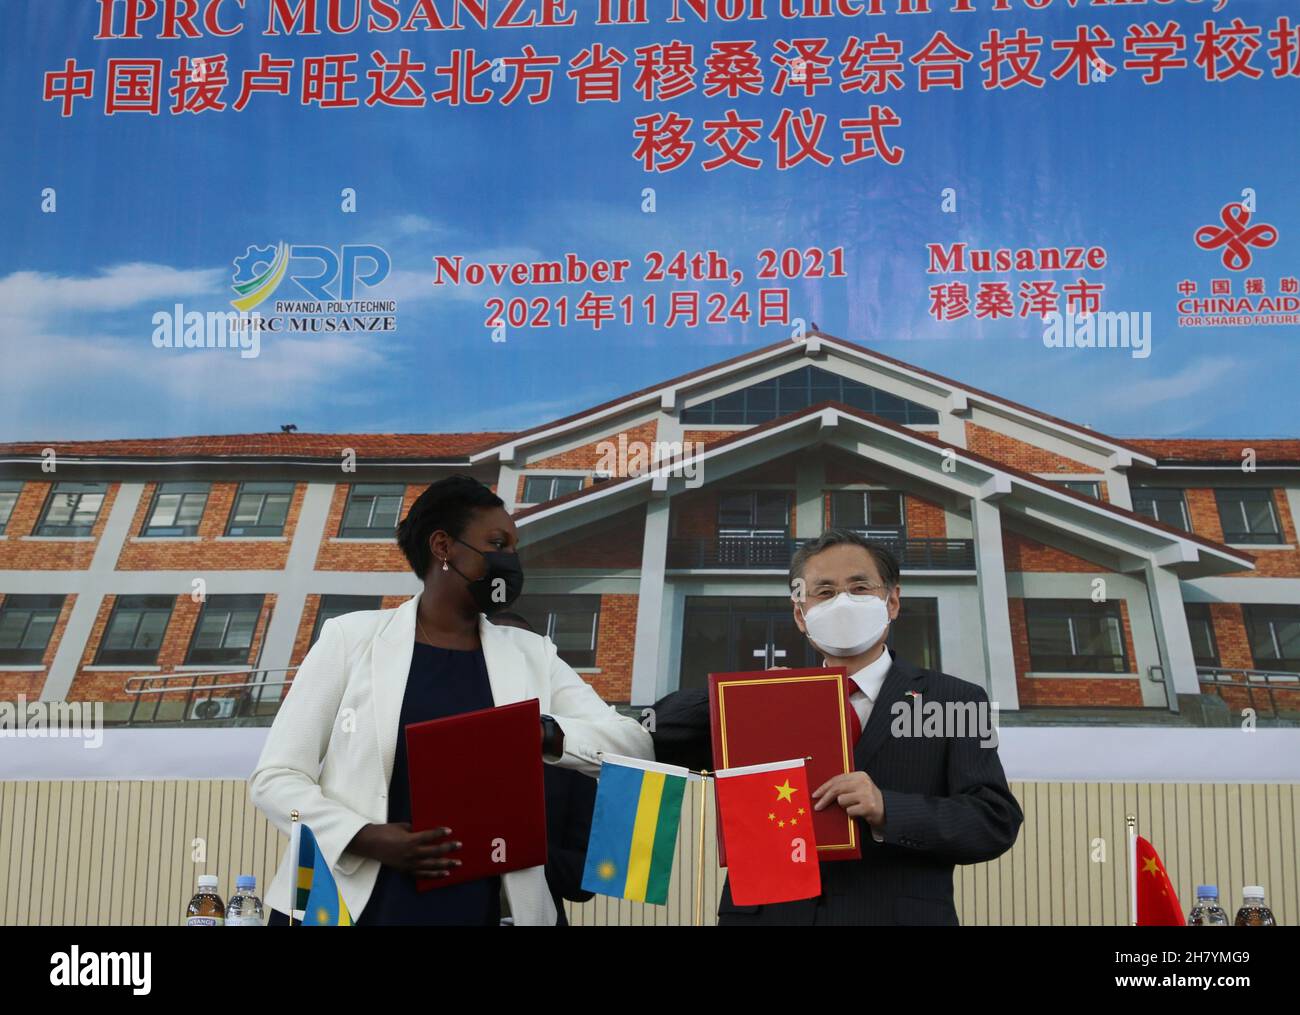 Kigali, Rwanda. 24th Nov, 2021. Chinese Ambassador to Rwanda Rao Hongwei (R) and the Minister of State in Charge of ICT and TVET at Rwanda's Ministry of Education Claudette Irere attend a handover ceremony of the extension project of the Institute of Polytechnic Regional Centre (IPRC) Musanze campus in Musanze, Rwanda, Nov. 24, 2021. The extension project of the IPRC Musanze campus, in the Northern Province of Rwanda, has been completed after more than two years' construction and handed over to the Rwandan government. Credit: Ji Li/Xinhua/Alamy Live News Stock Photo